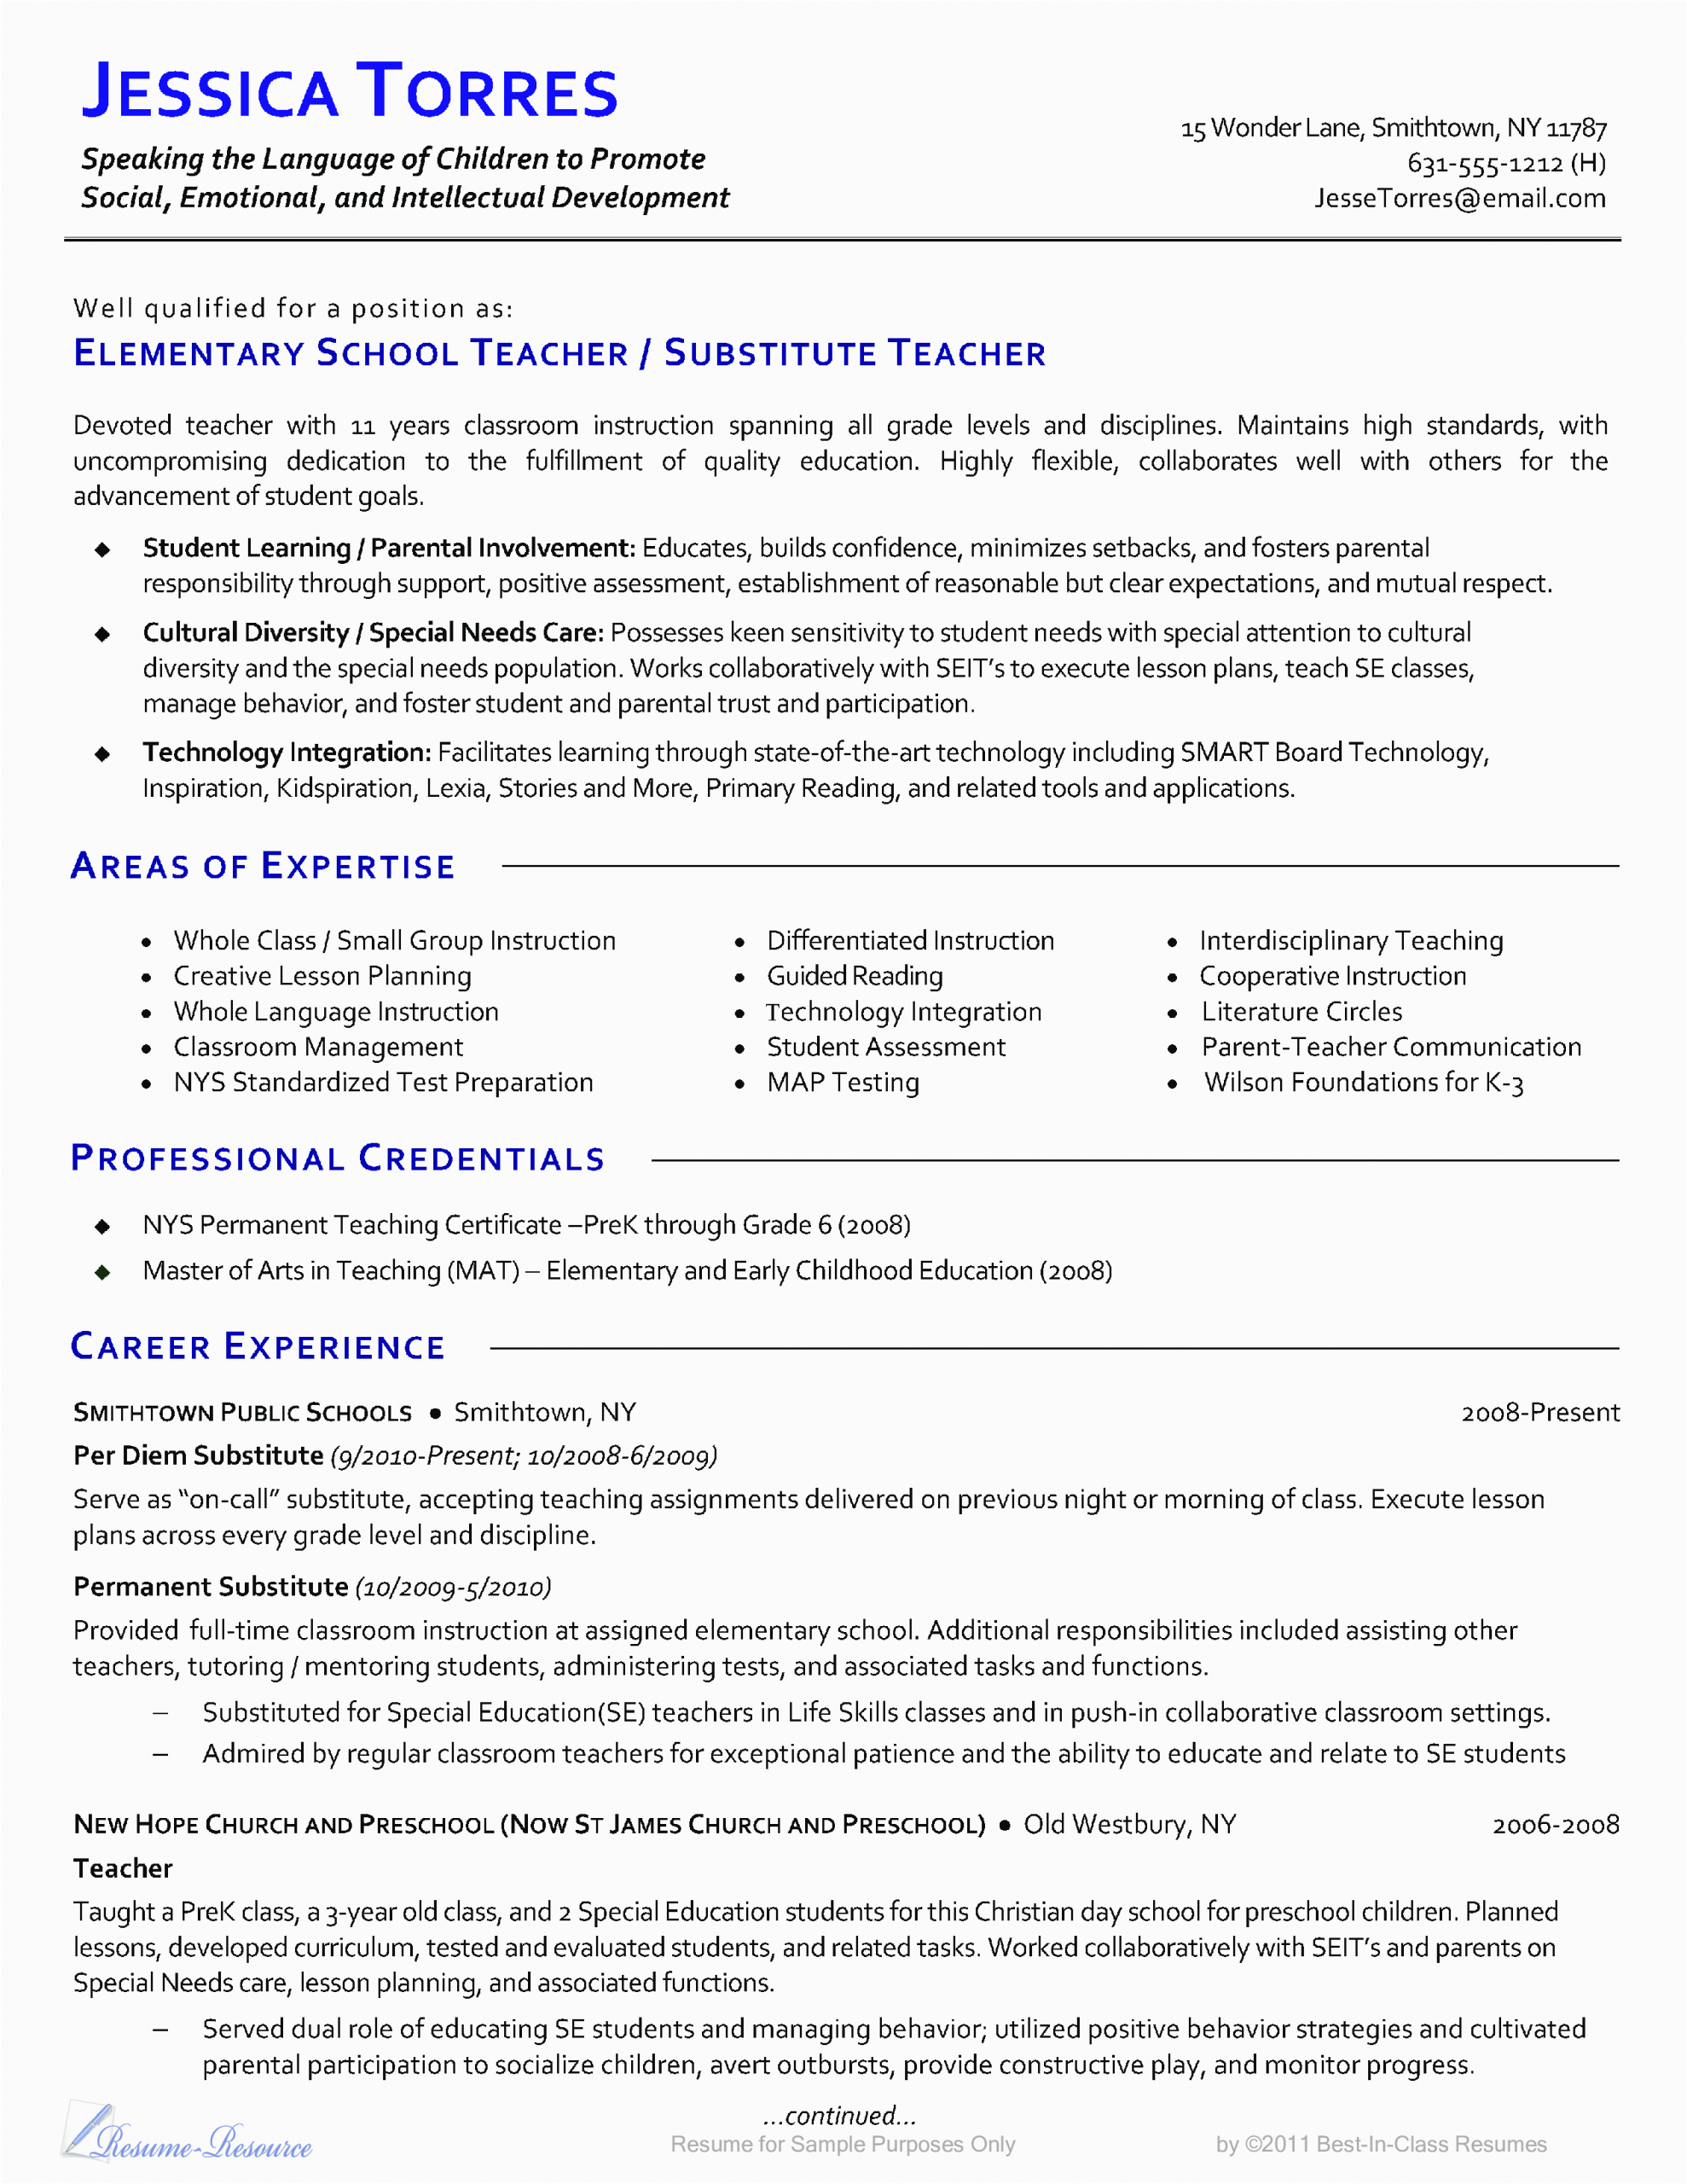 Free Resume Template for Elementary School Teacher Free Elementary School Teacher Cv Template